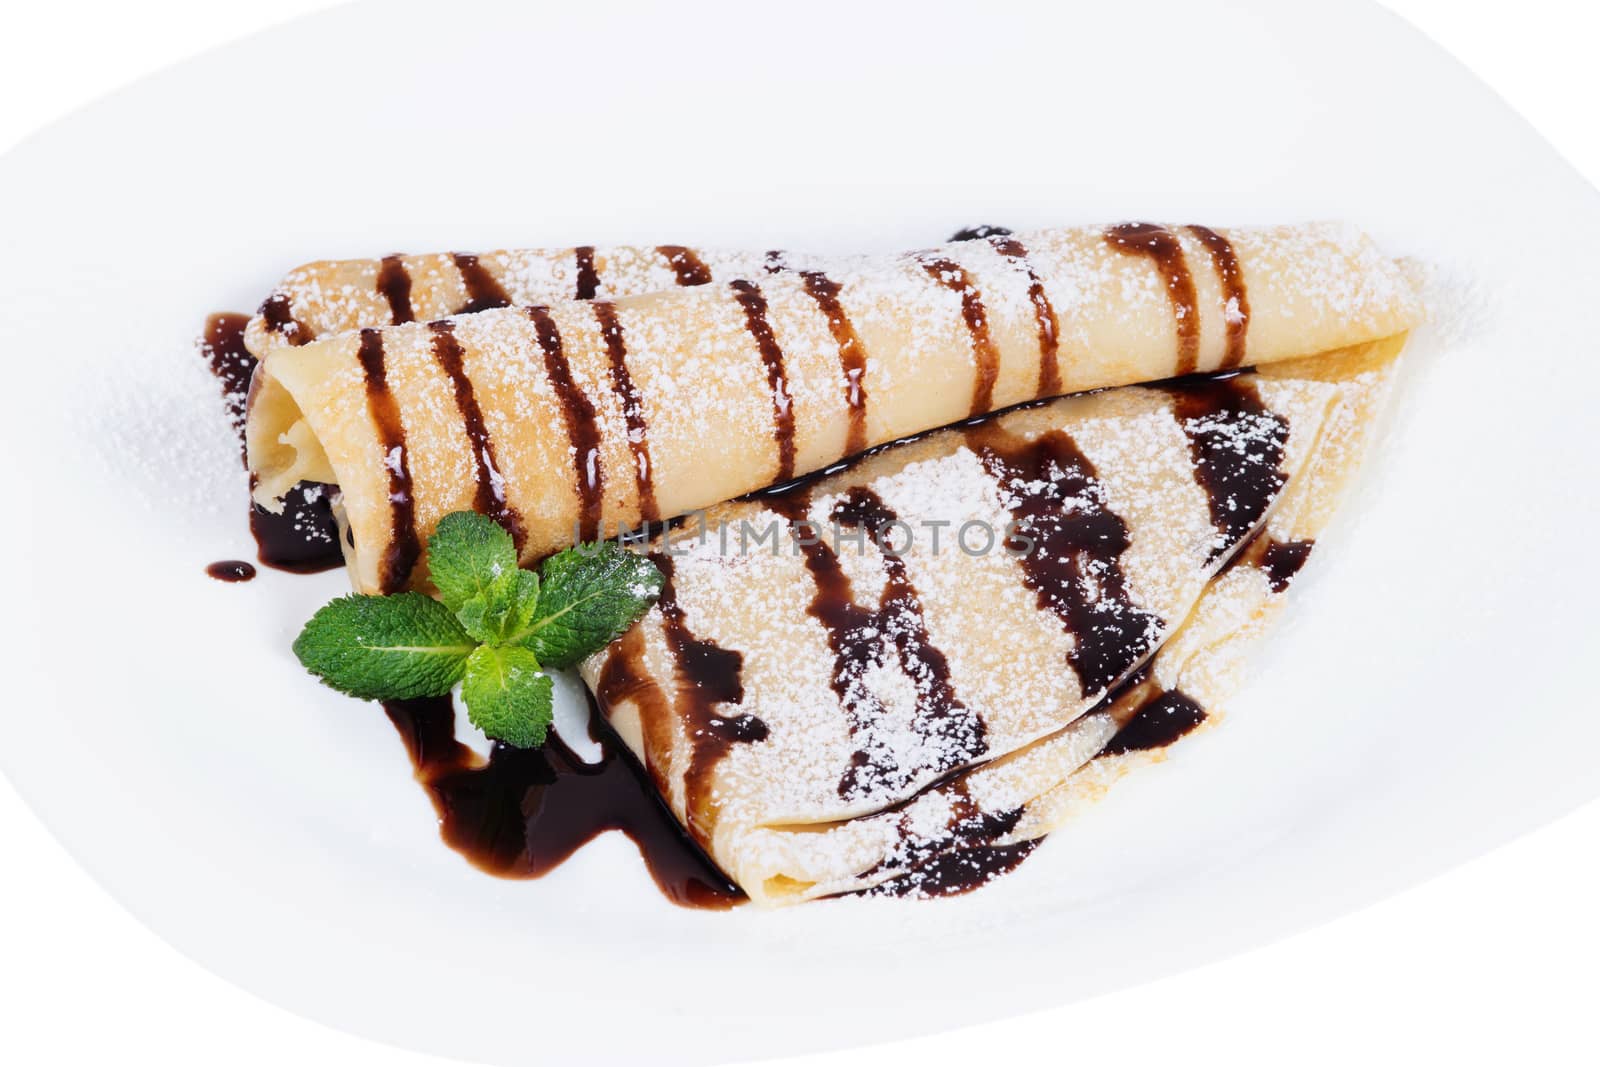 Pancakes with chocolate sauce and mint  on a plate, isolated